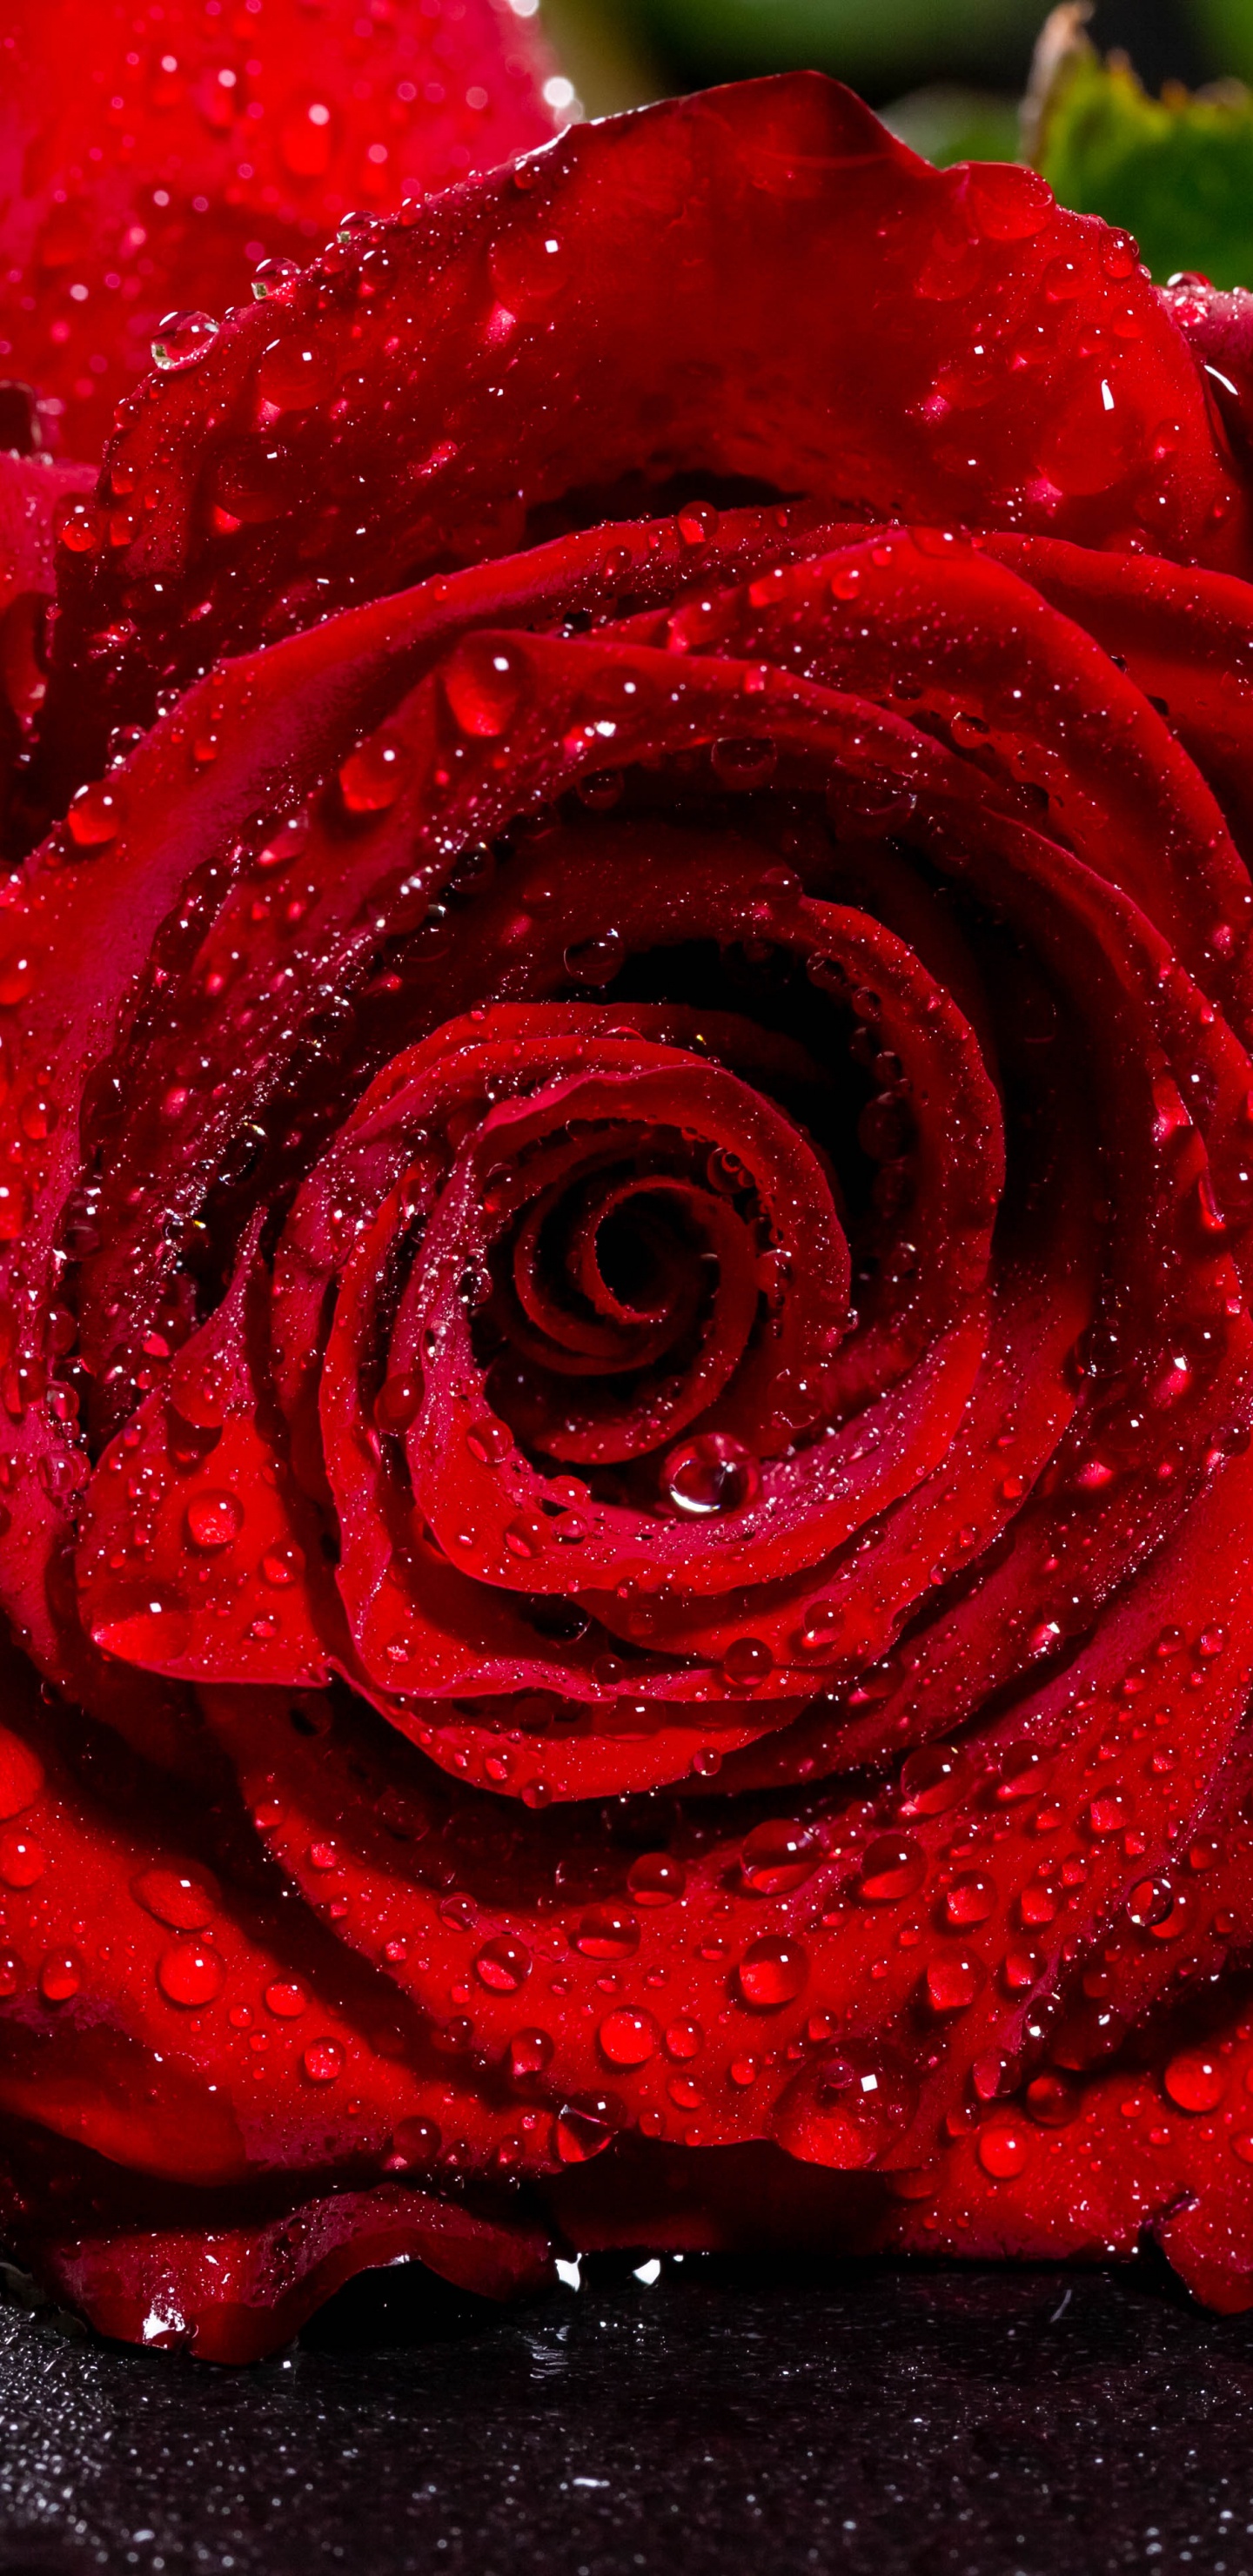 Red Rose on Black Surface. Wallpaper in 1440x2960 Resolution